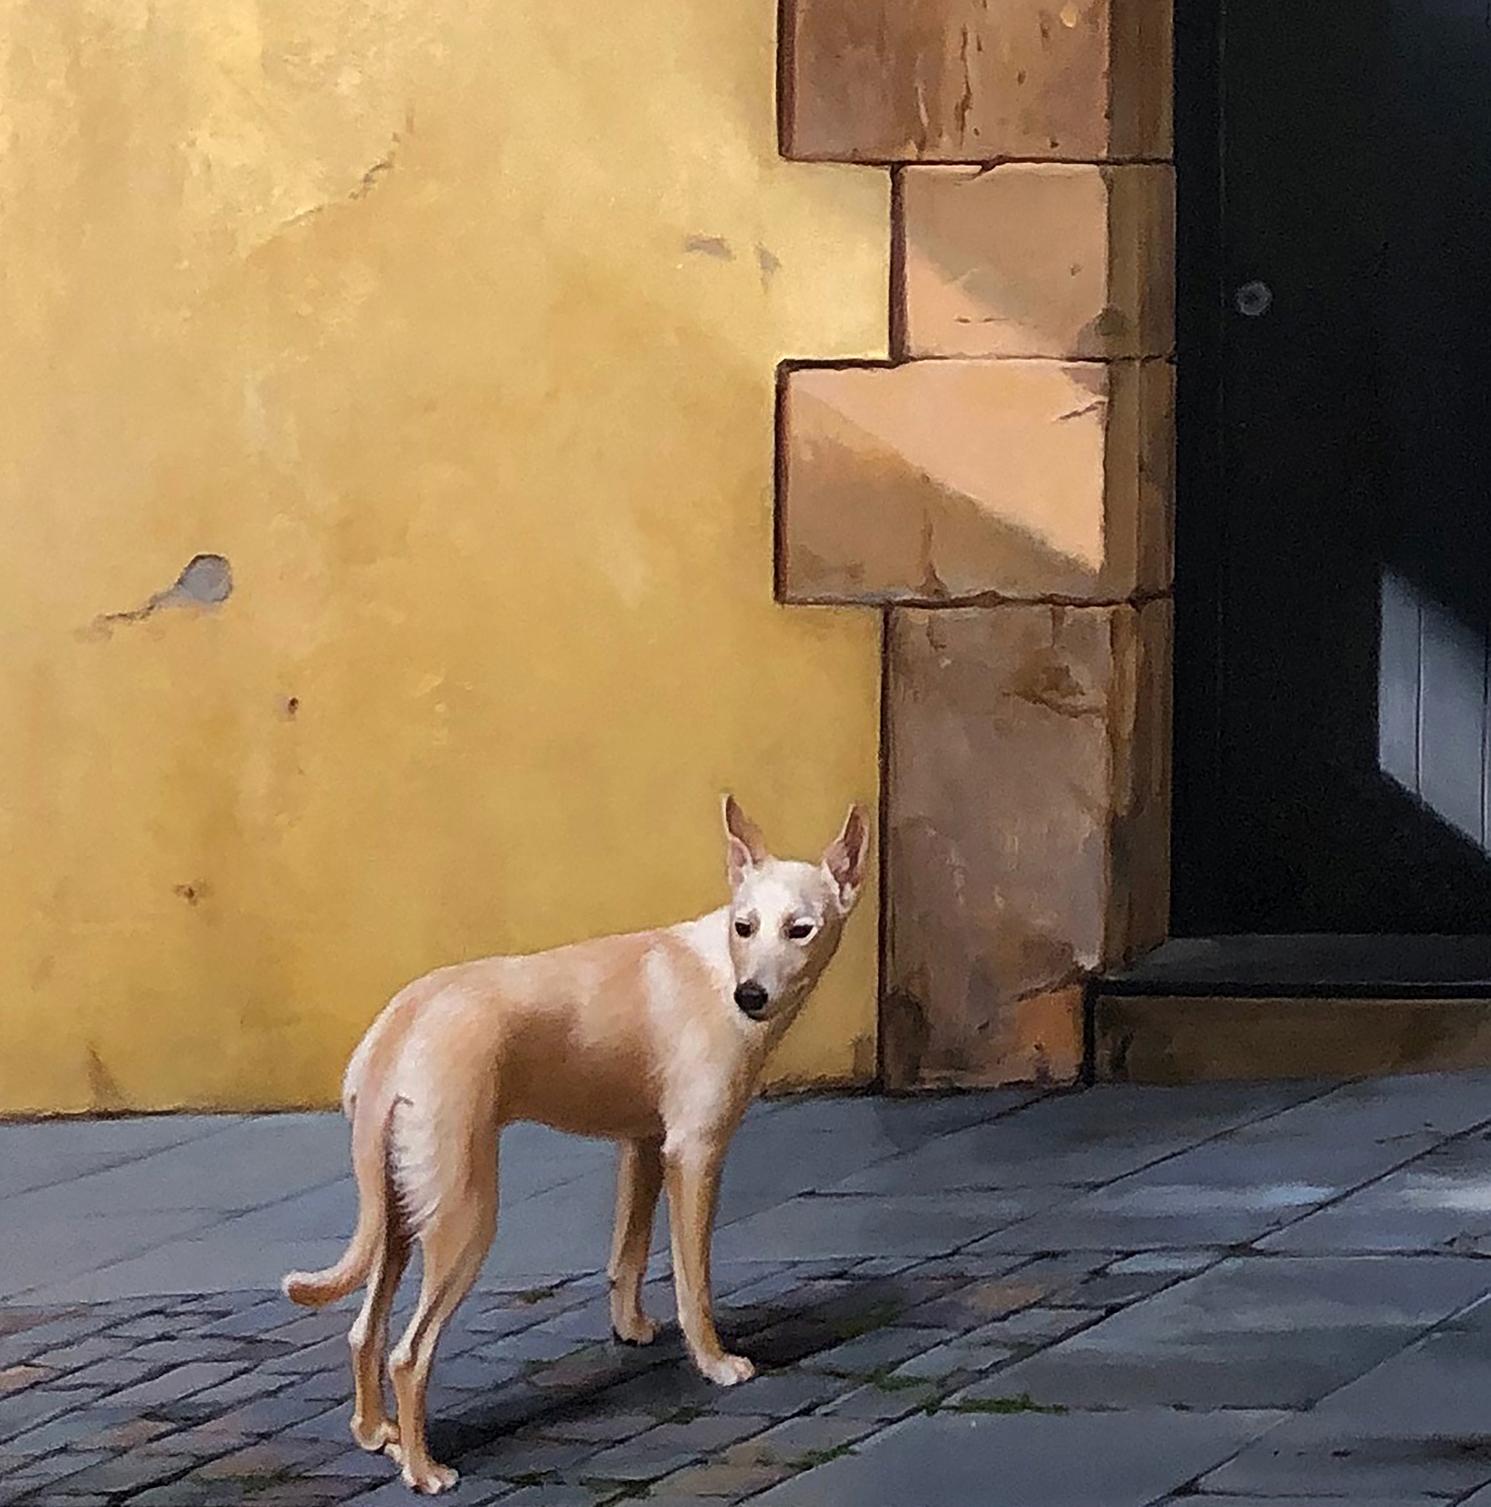 Sombras des Caldes (The Shadows of Caldes) - Architectural Imagery and a Dog  - Painting by Carol Pylant